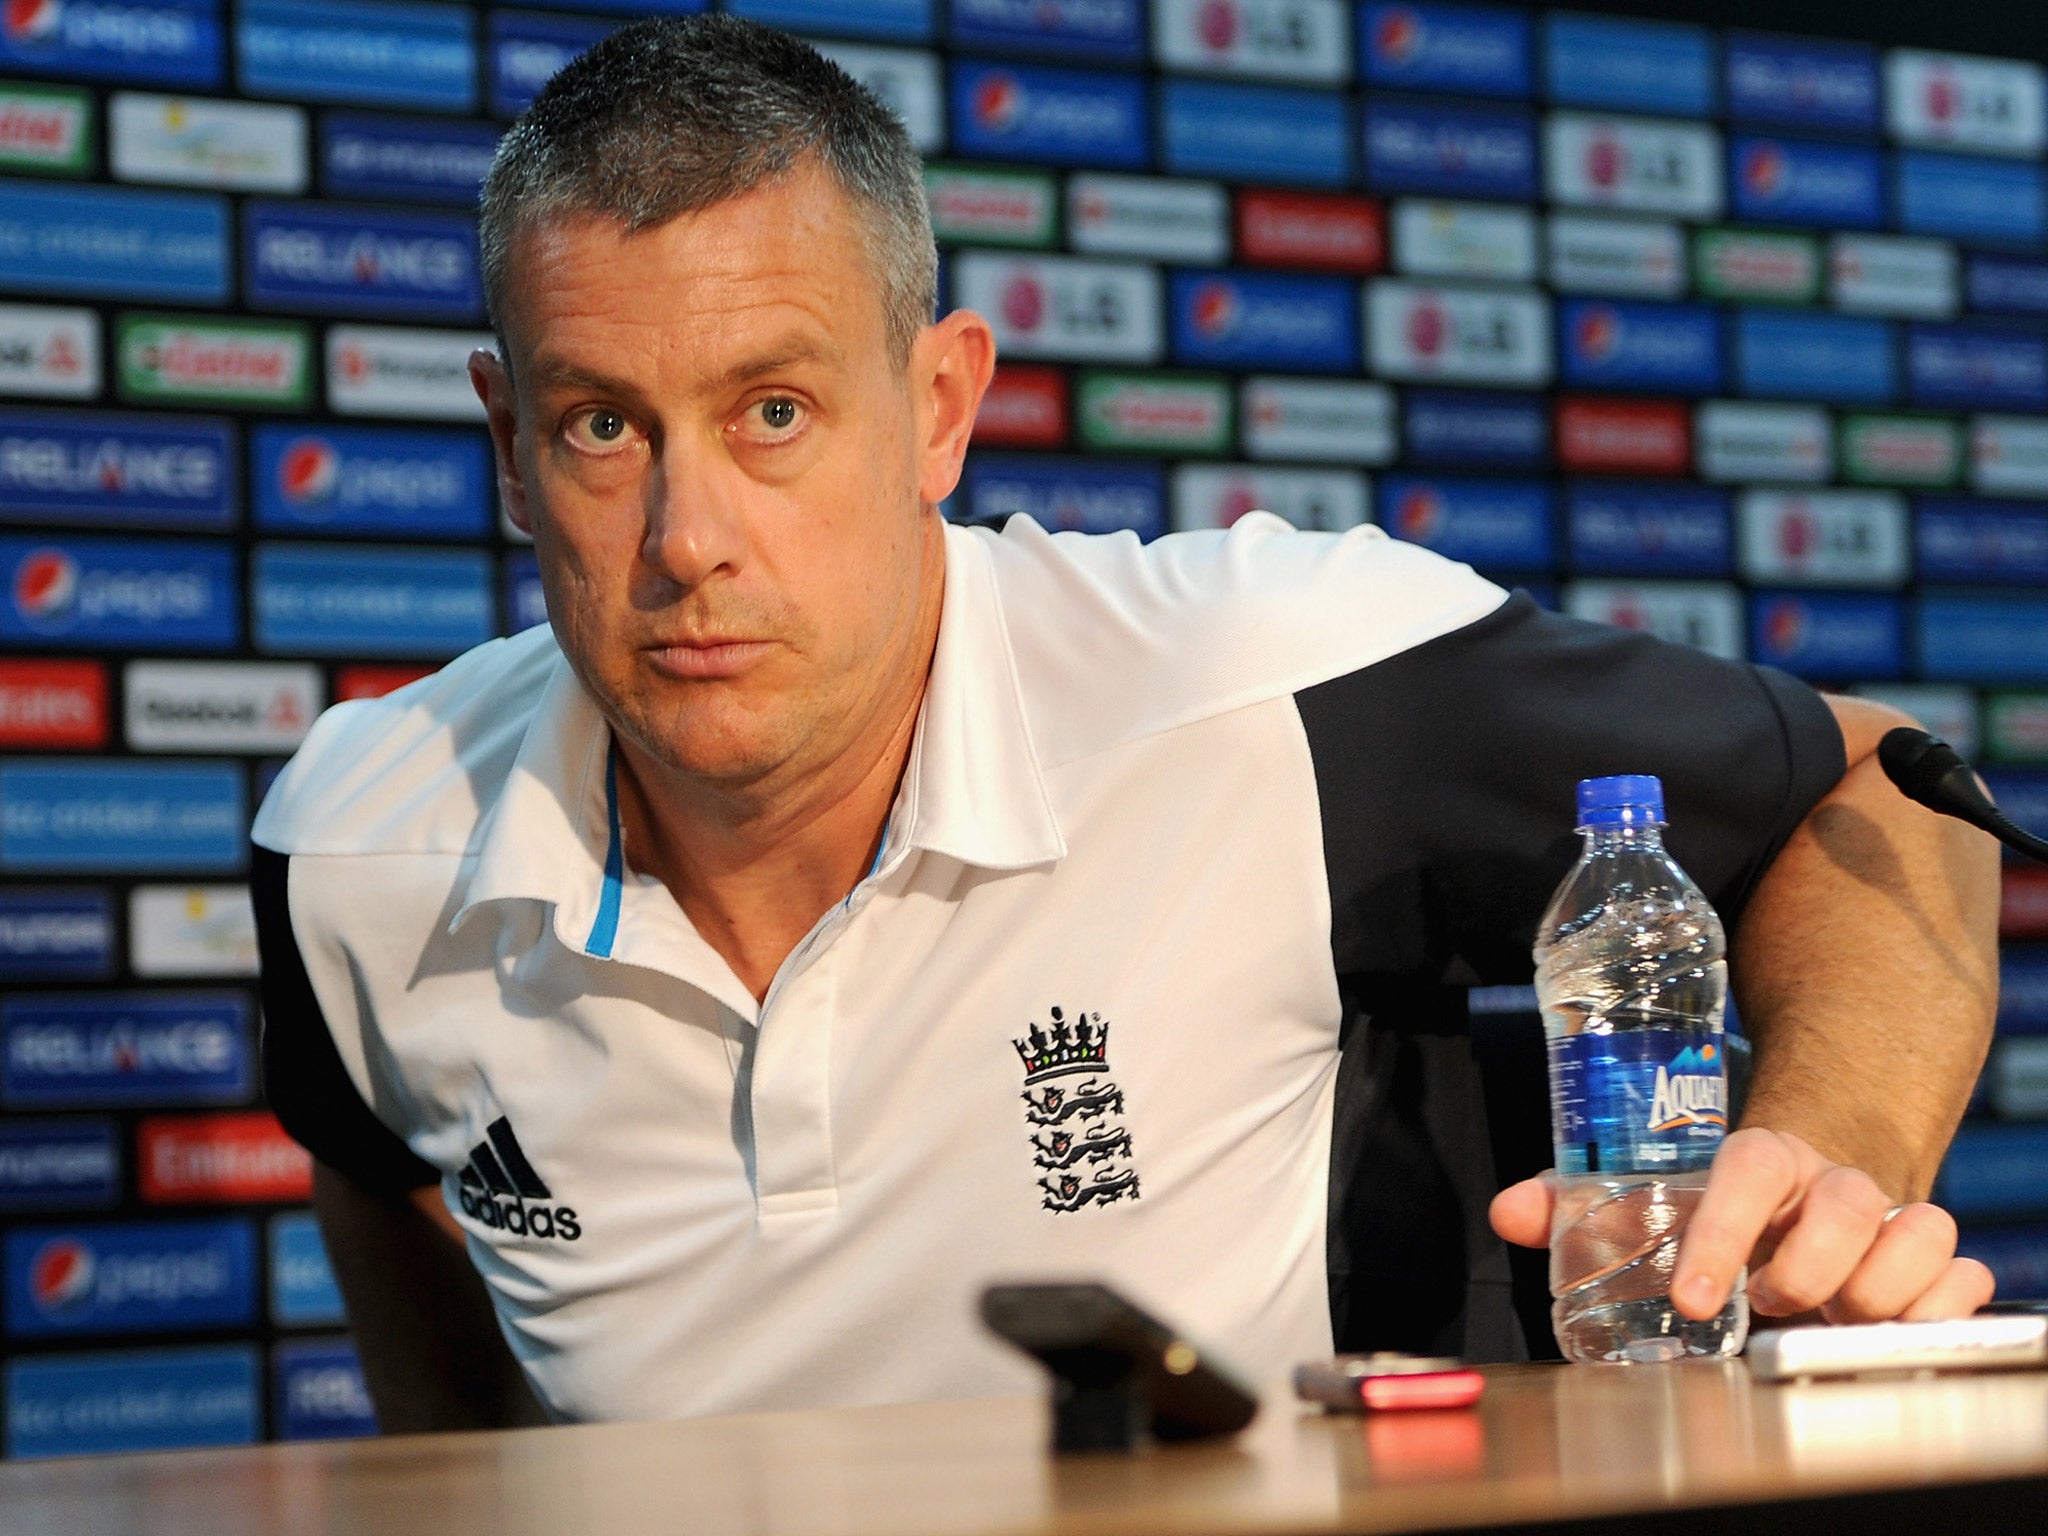 Ashley Giles may have to seek alternative employment